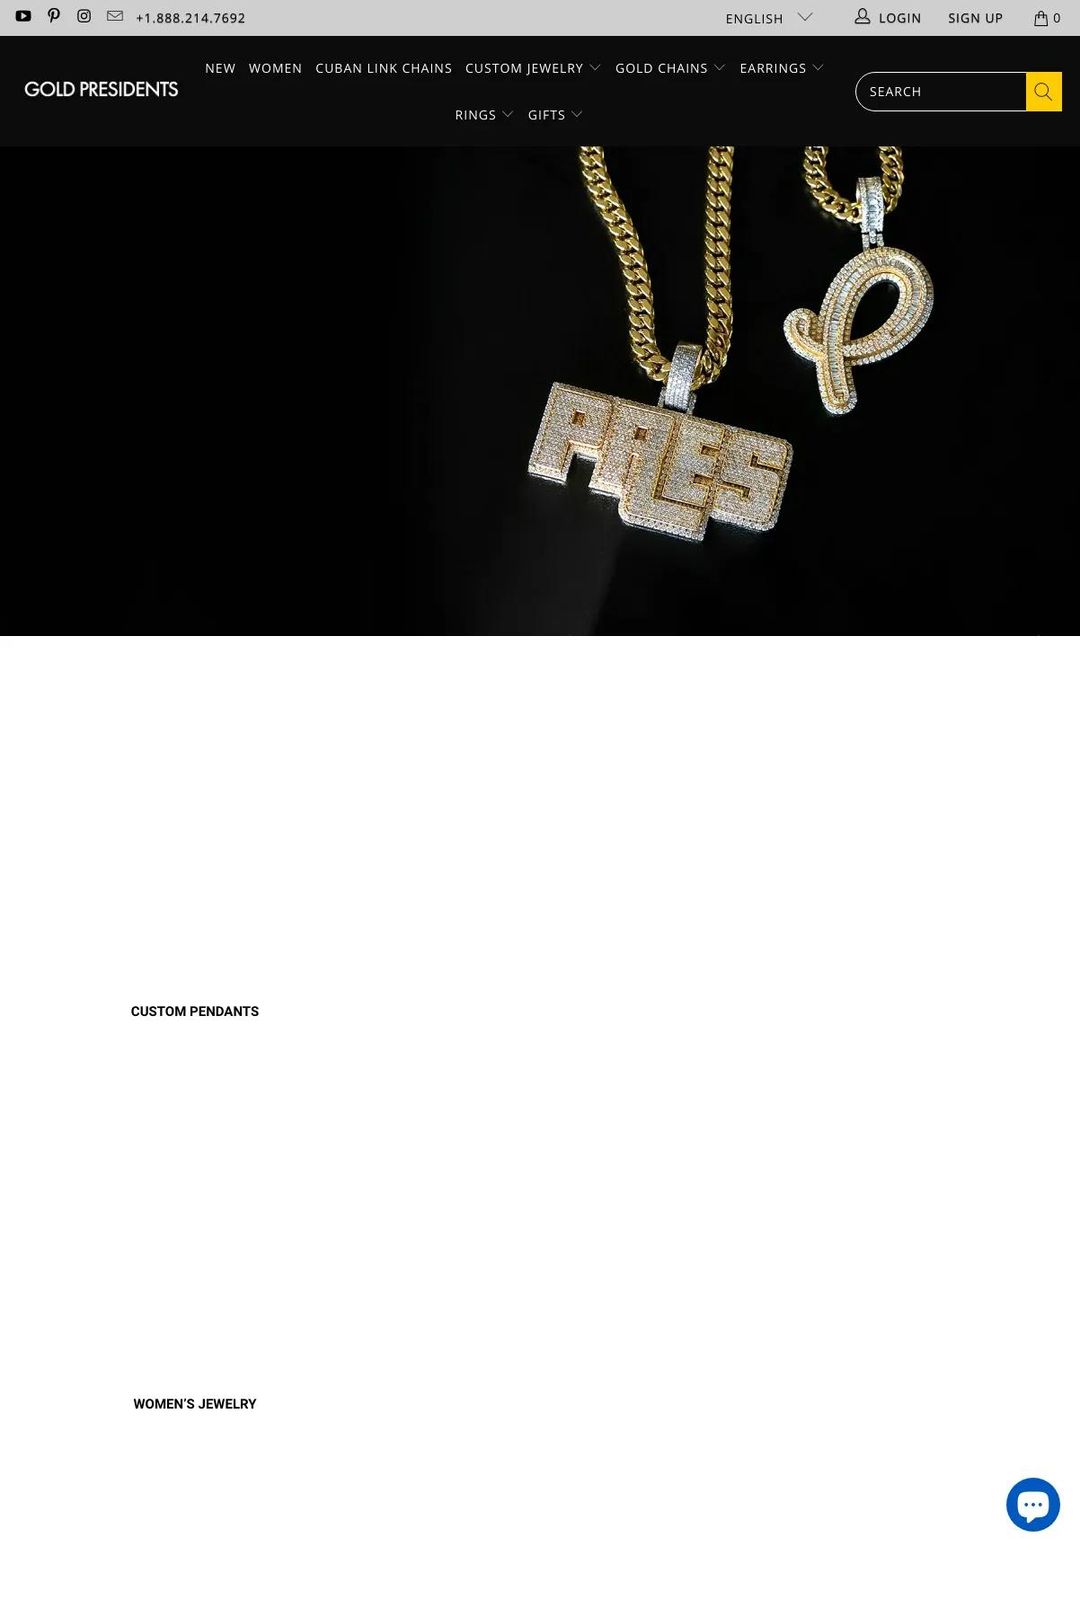 Screenshot 1 of Gold Presidents (Example Shopify Jewelry Website)